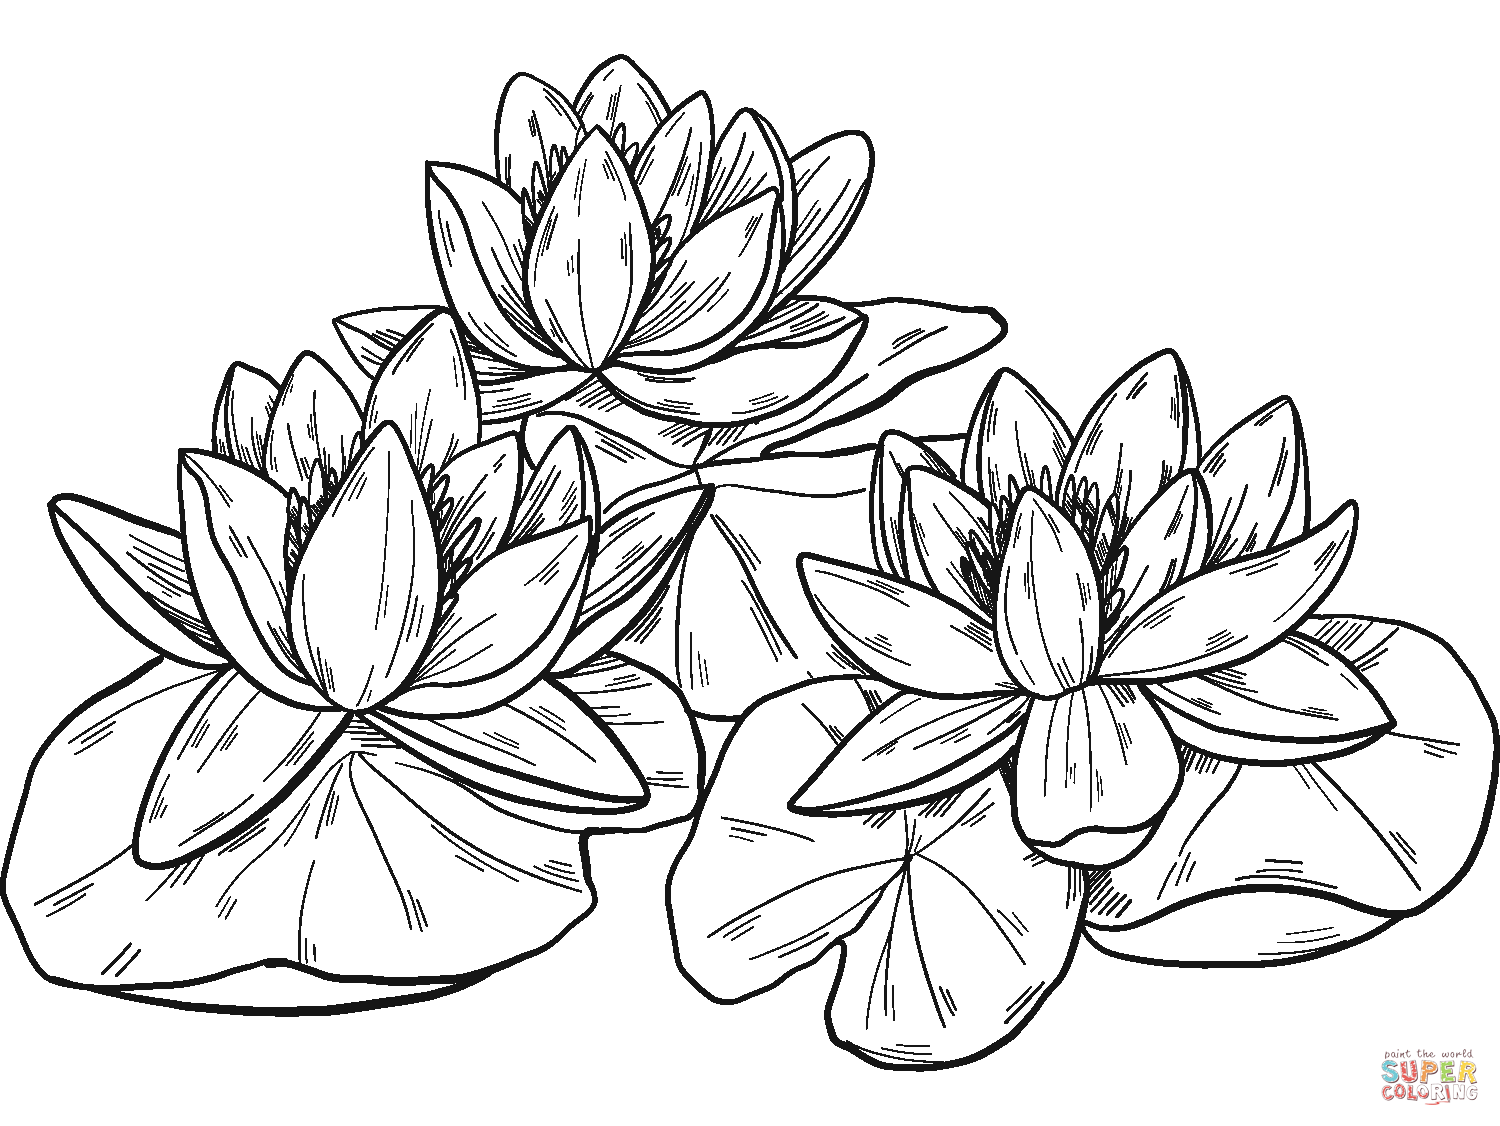 Water Lilies coloring page | Free Printable Coloring Pages